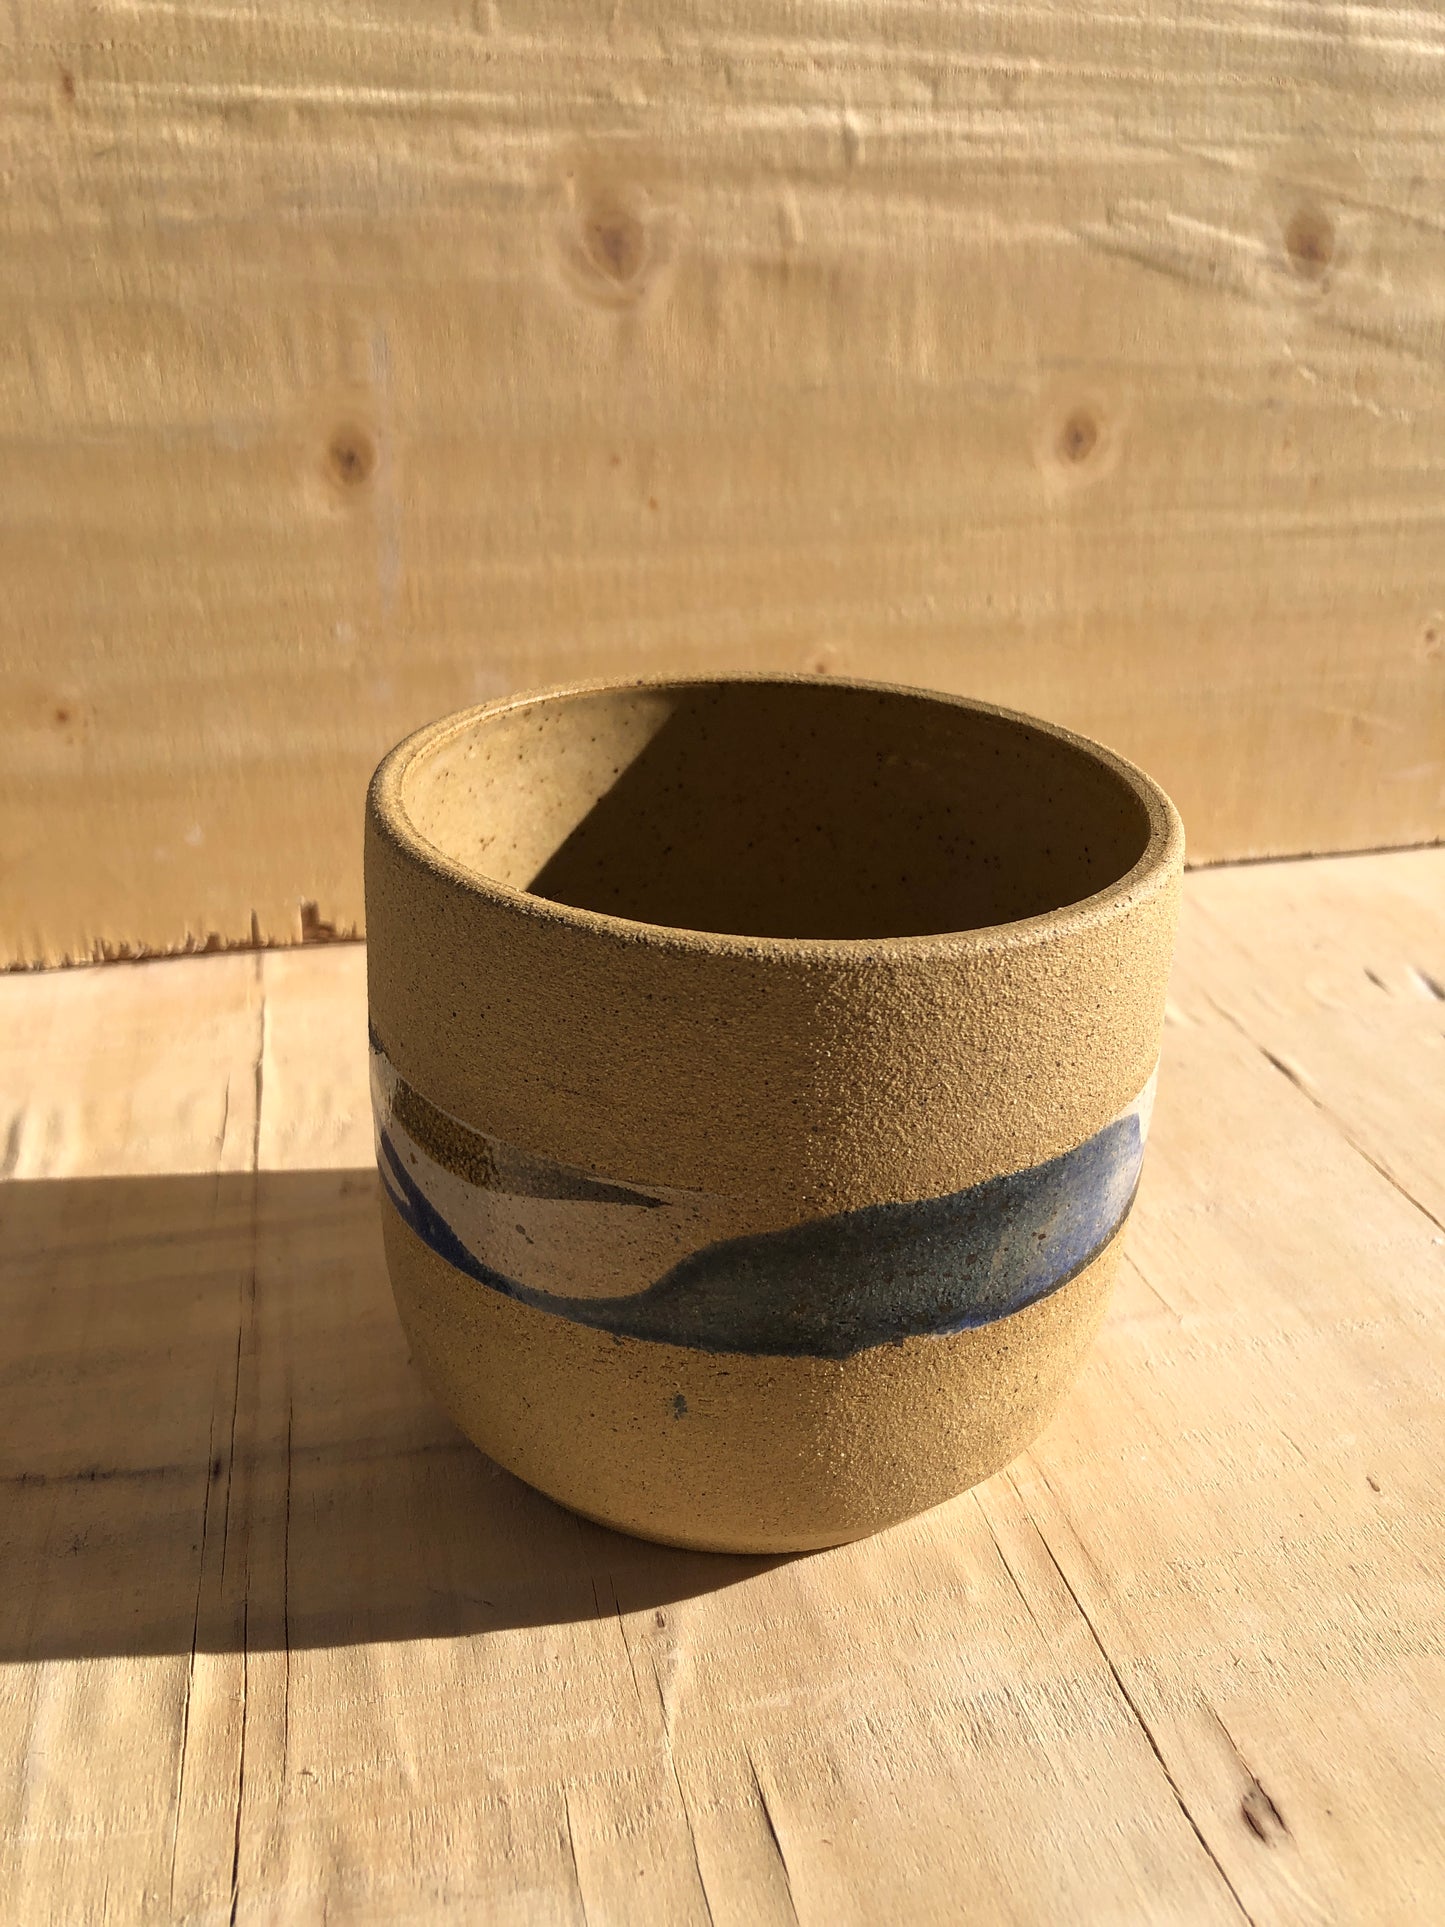 Planter with speckled clay and white, blue and brown watercolor styled design